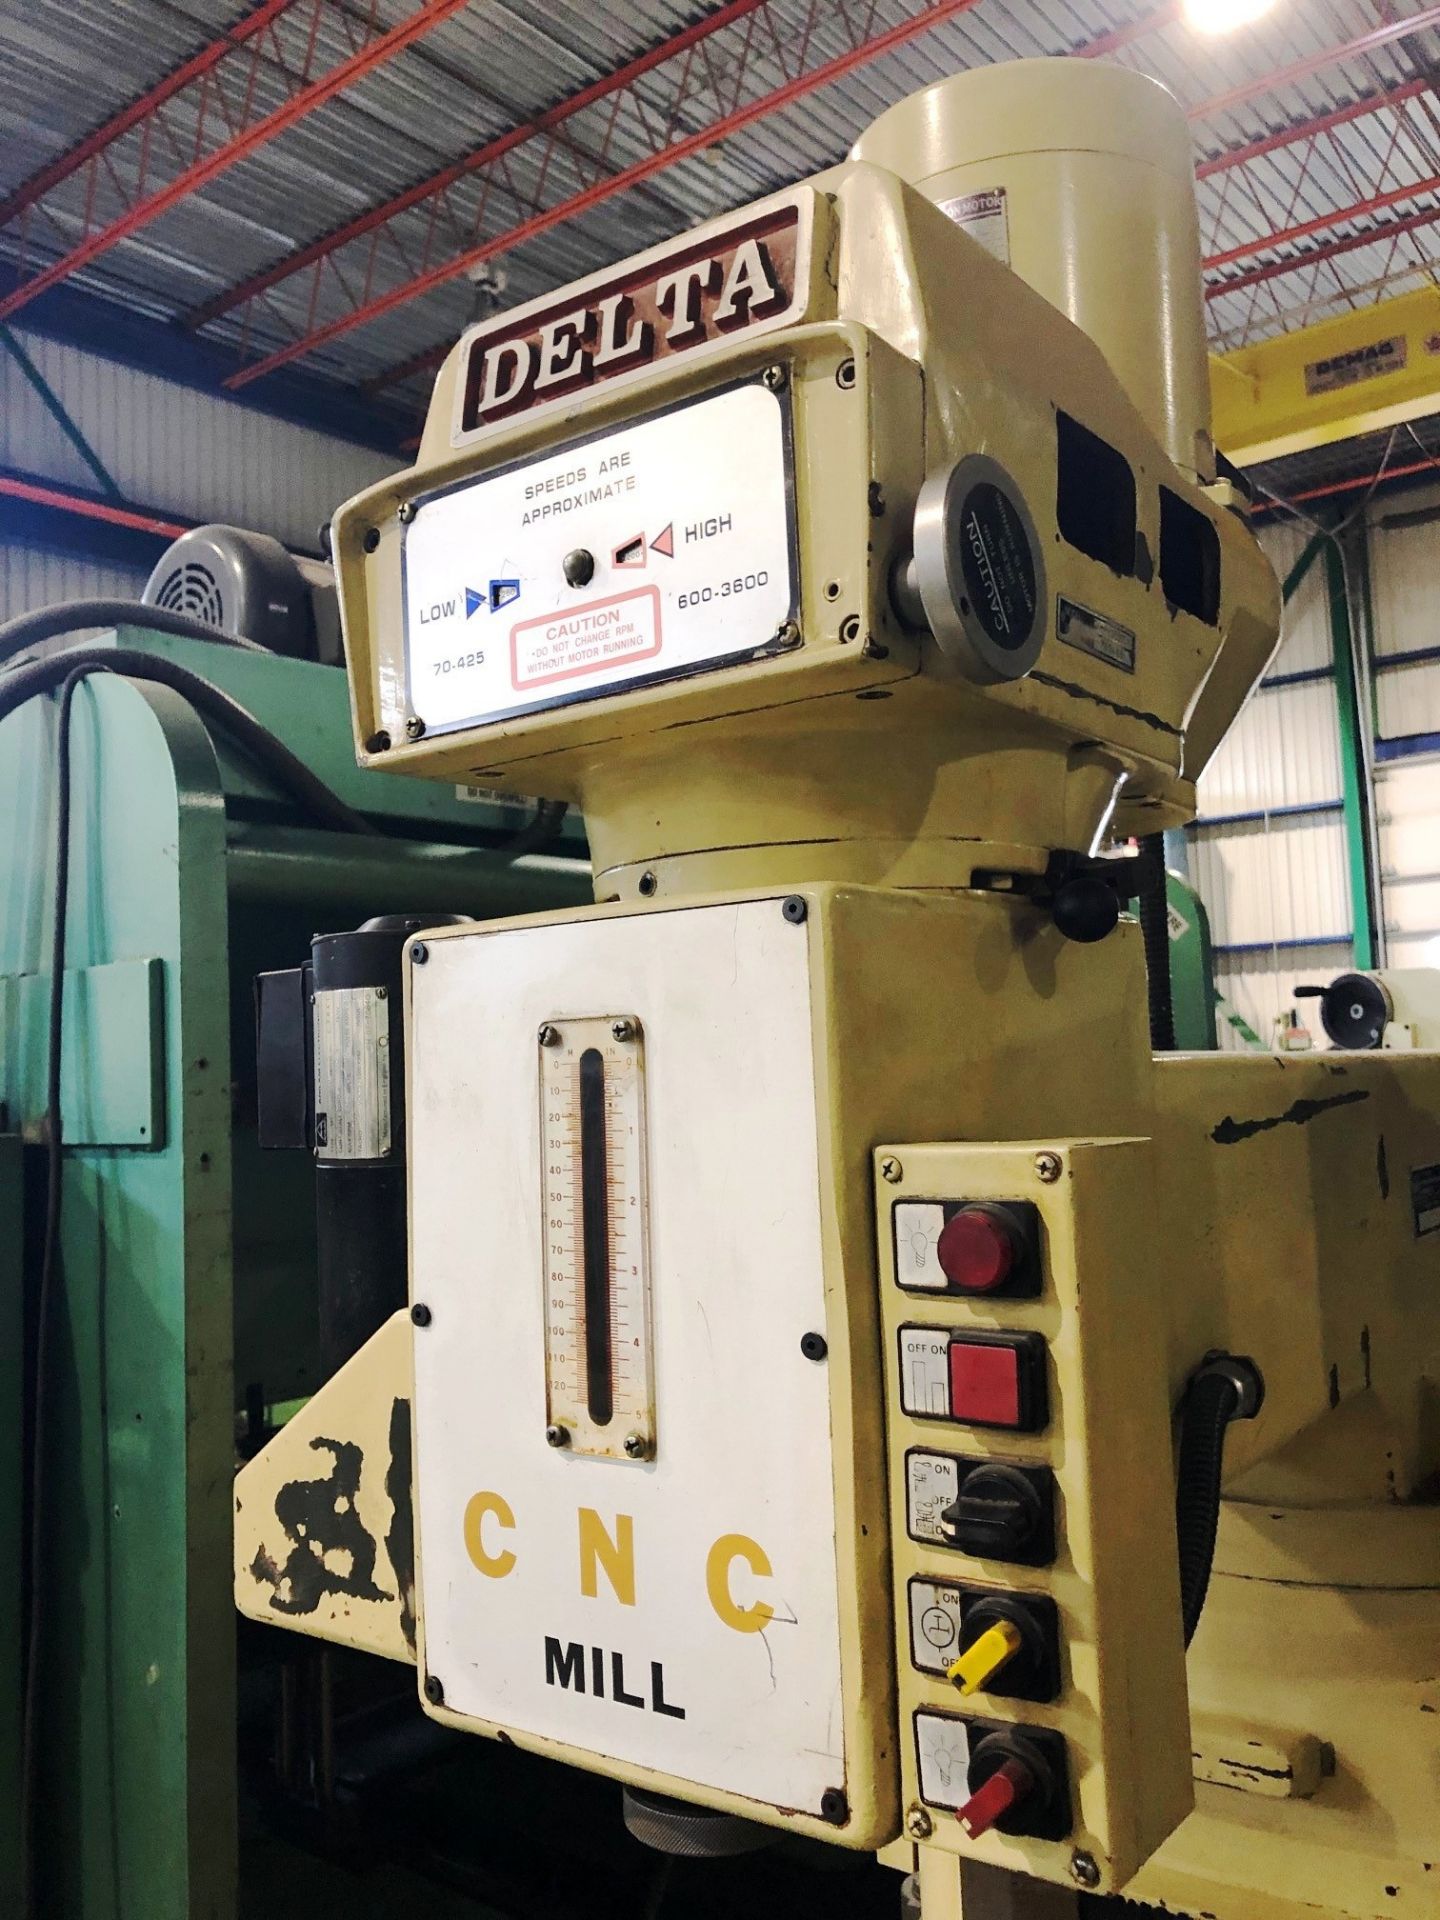 DELTA MILLING (CNC), S/N 2343-1197, 10'' X 52'' TABLE - LOCATION MONTREAL, QUEBEC (CANADA) - Image 4 of 5